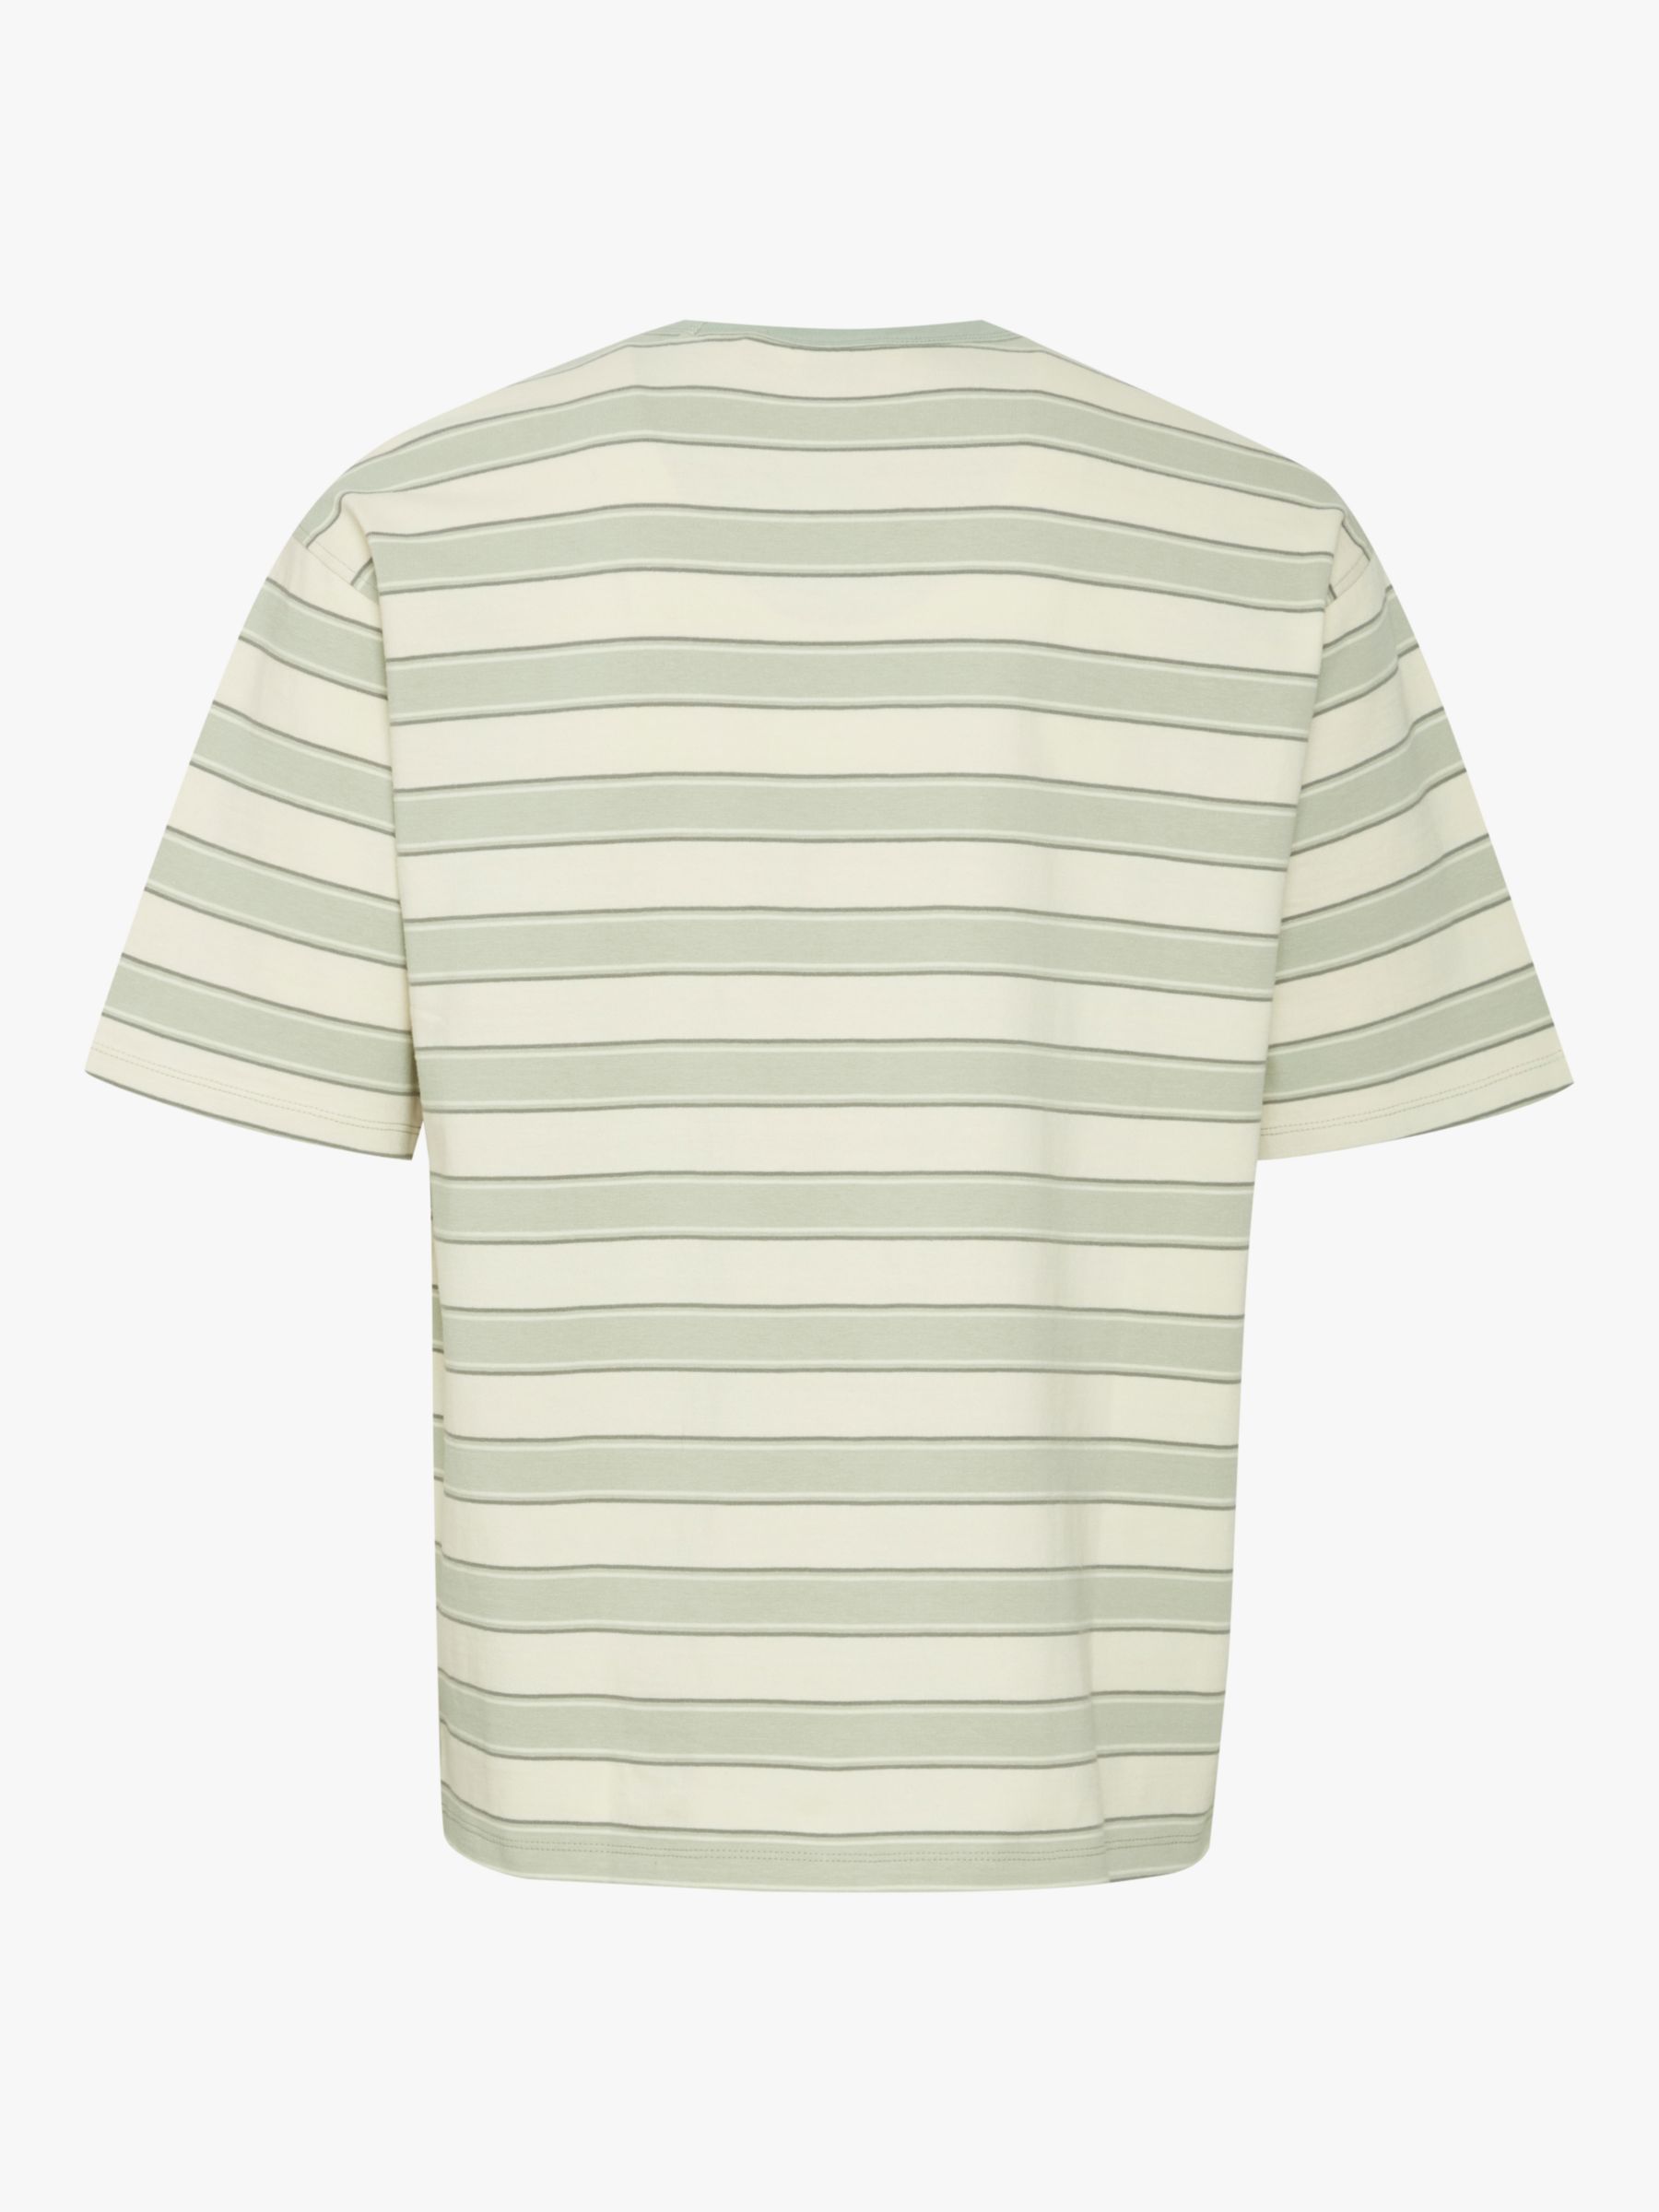 Buy Casual Friday Tue Short Sleeve Relaxed T-Shirt, Desert Sage Online at johnlewis.com